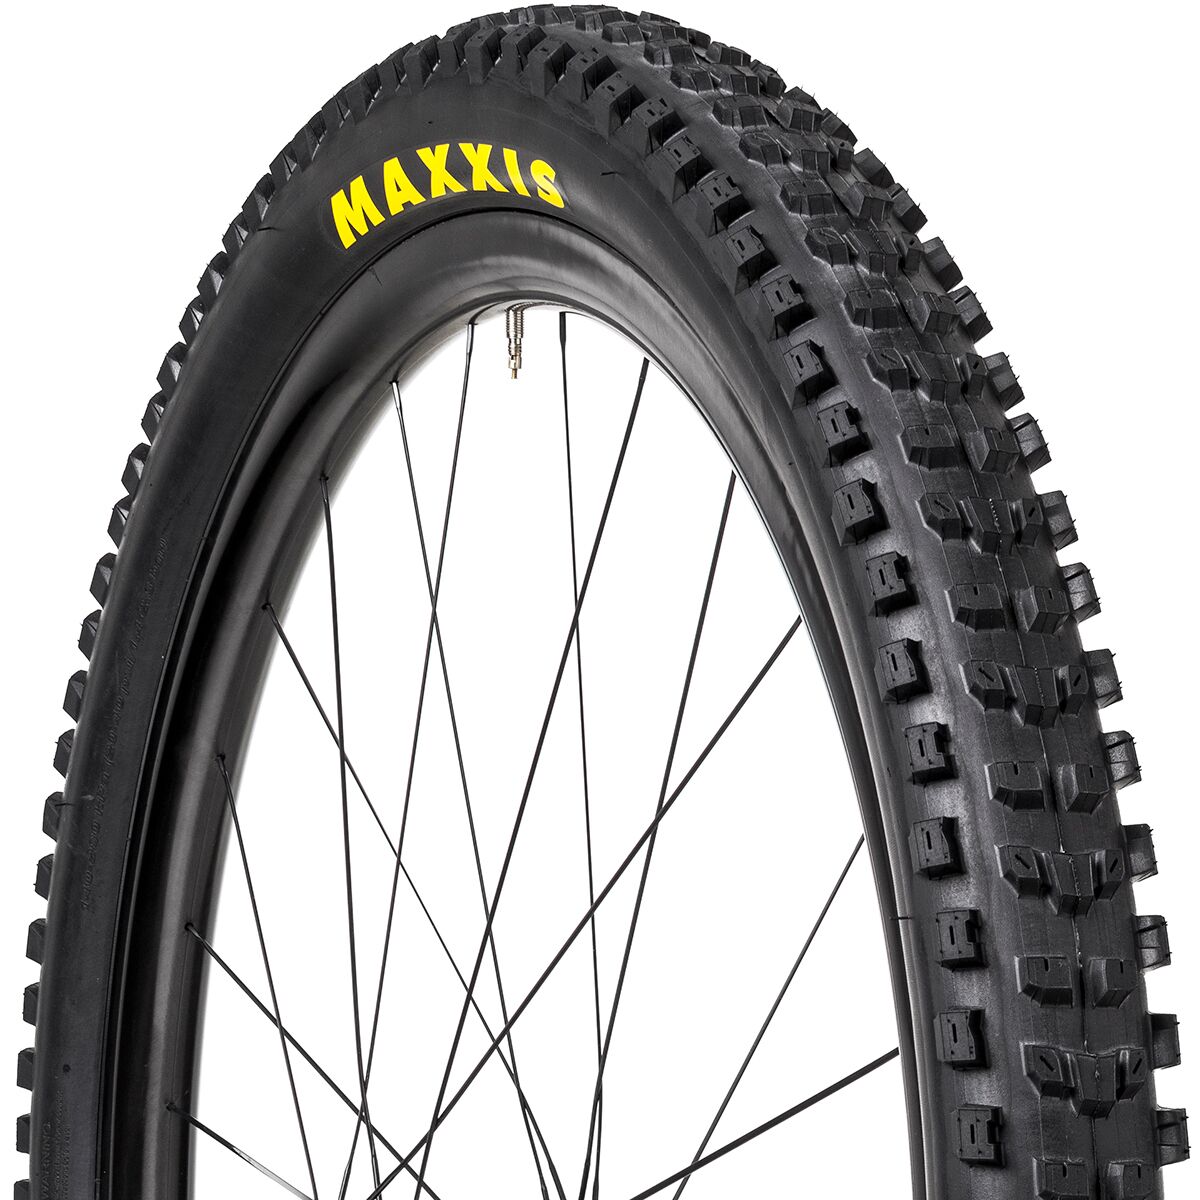 Maxxis Dissector Wide Trail Dual Compound EXO/TR 29in Tire Dual Compound/EXO/TR, 29x2.6